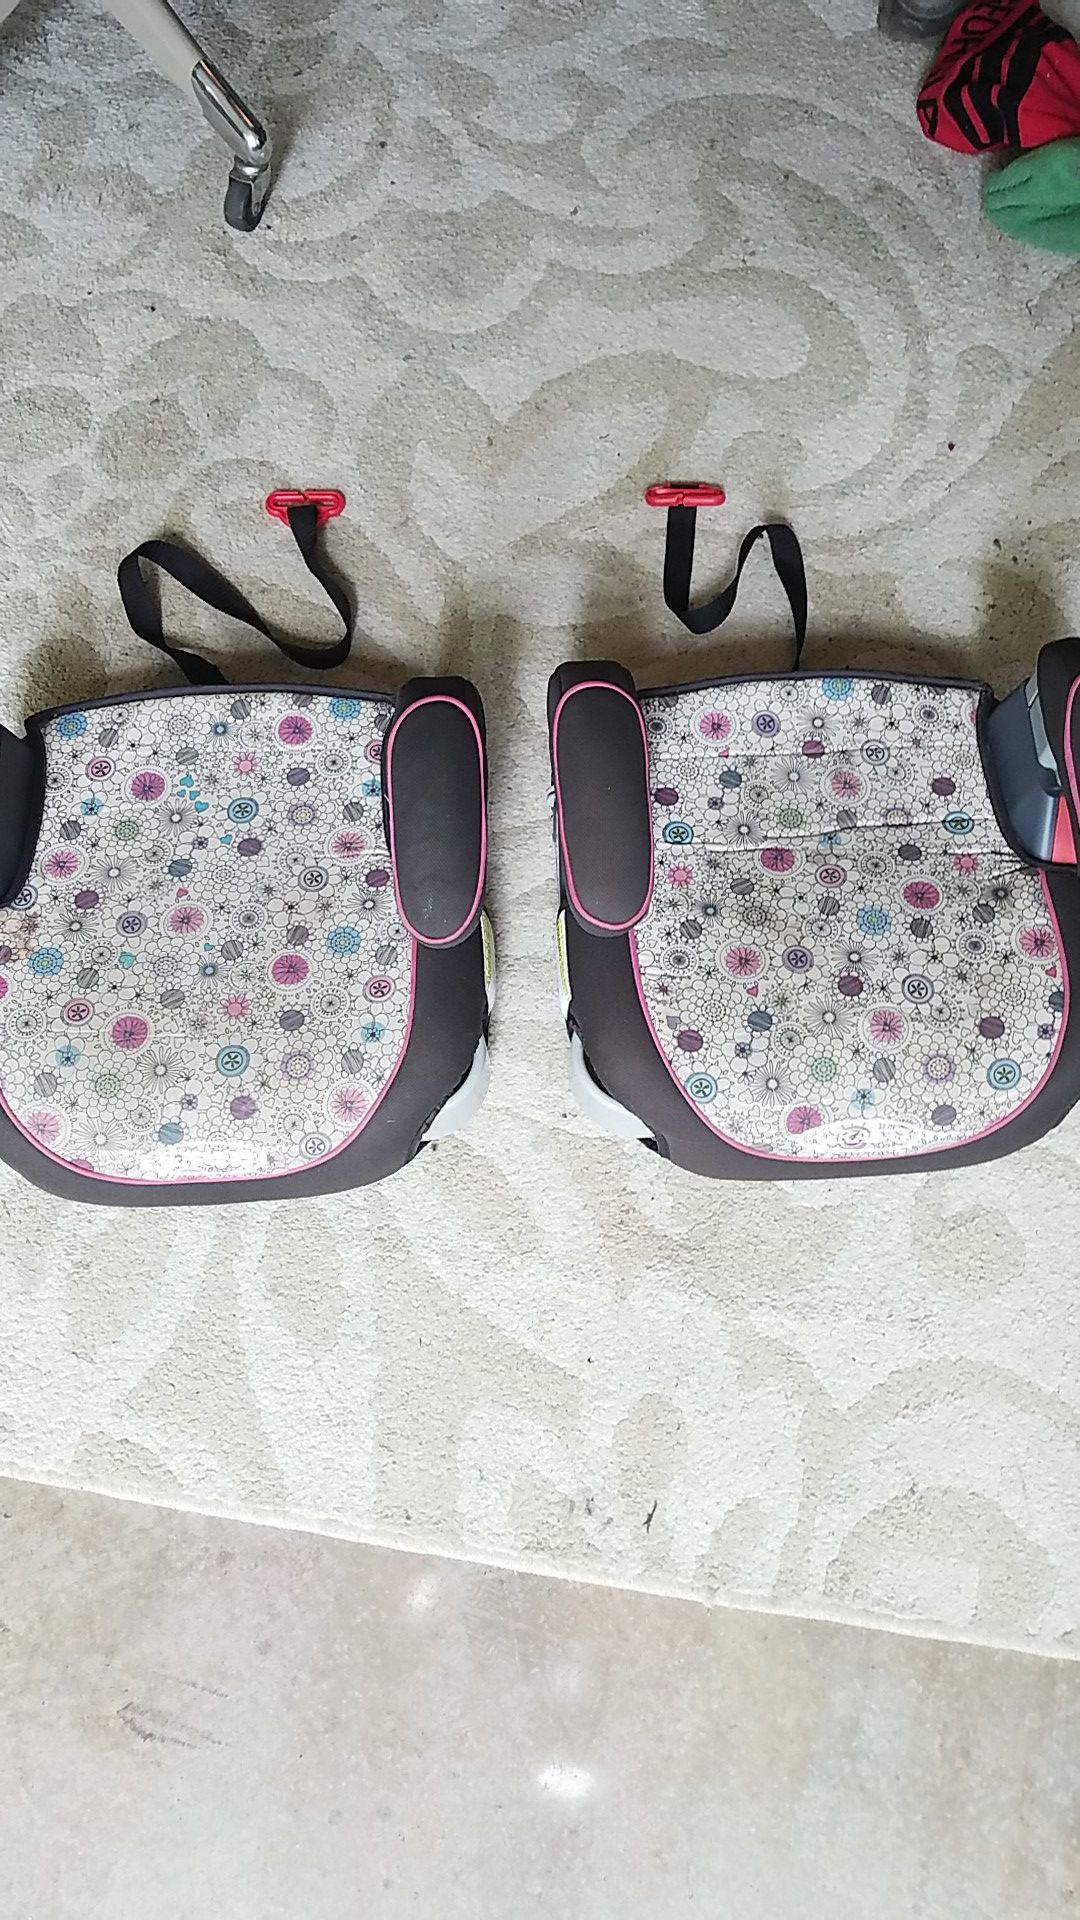 3 x Graco flowers booster seats